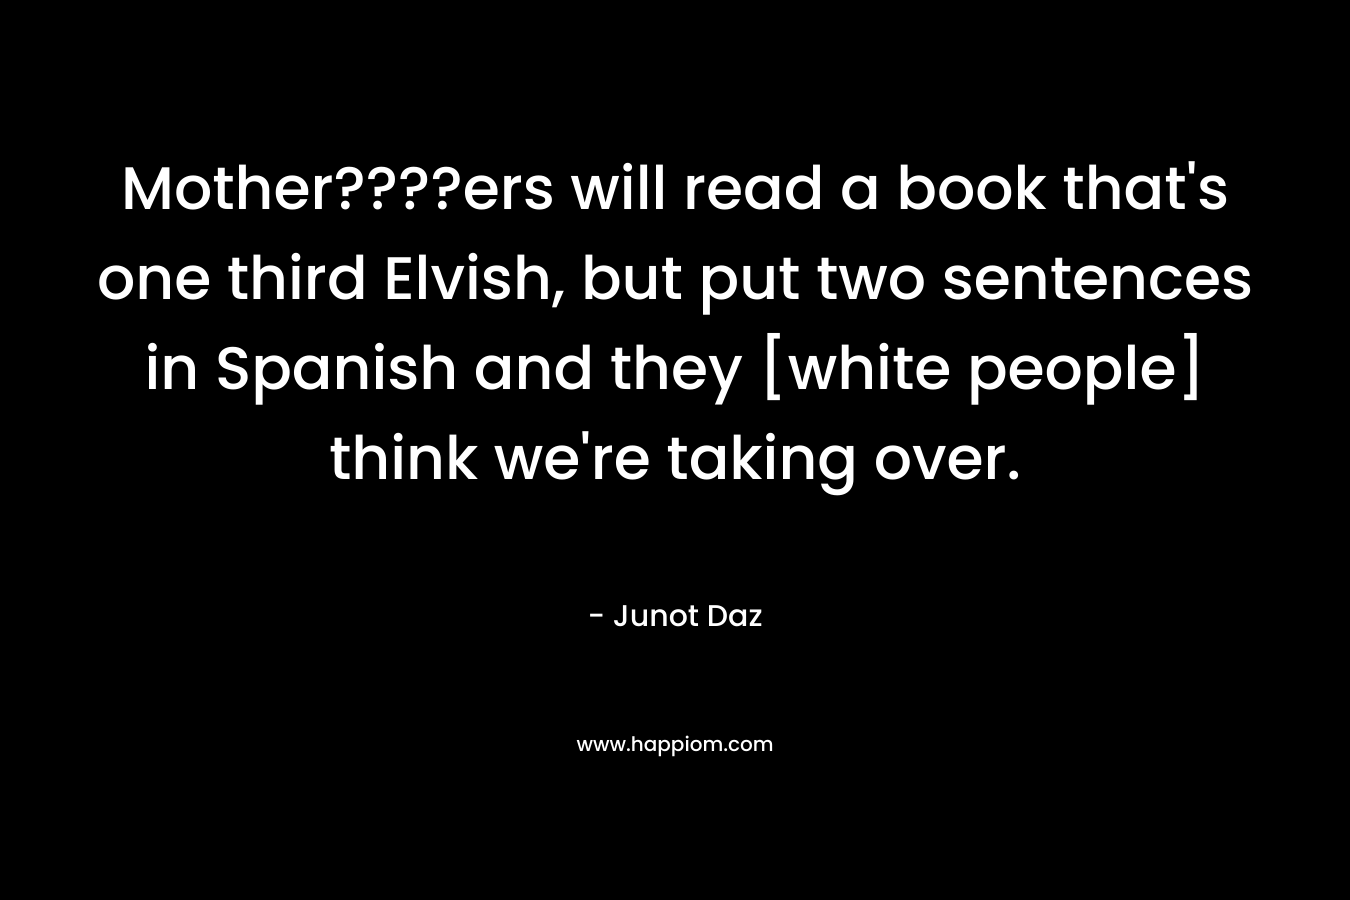 Mother????ers will read a book that’s one third Elvish, but put two sentences in Spanish and they [white people] think we’re taking over. – Junot Daz